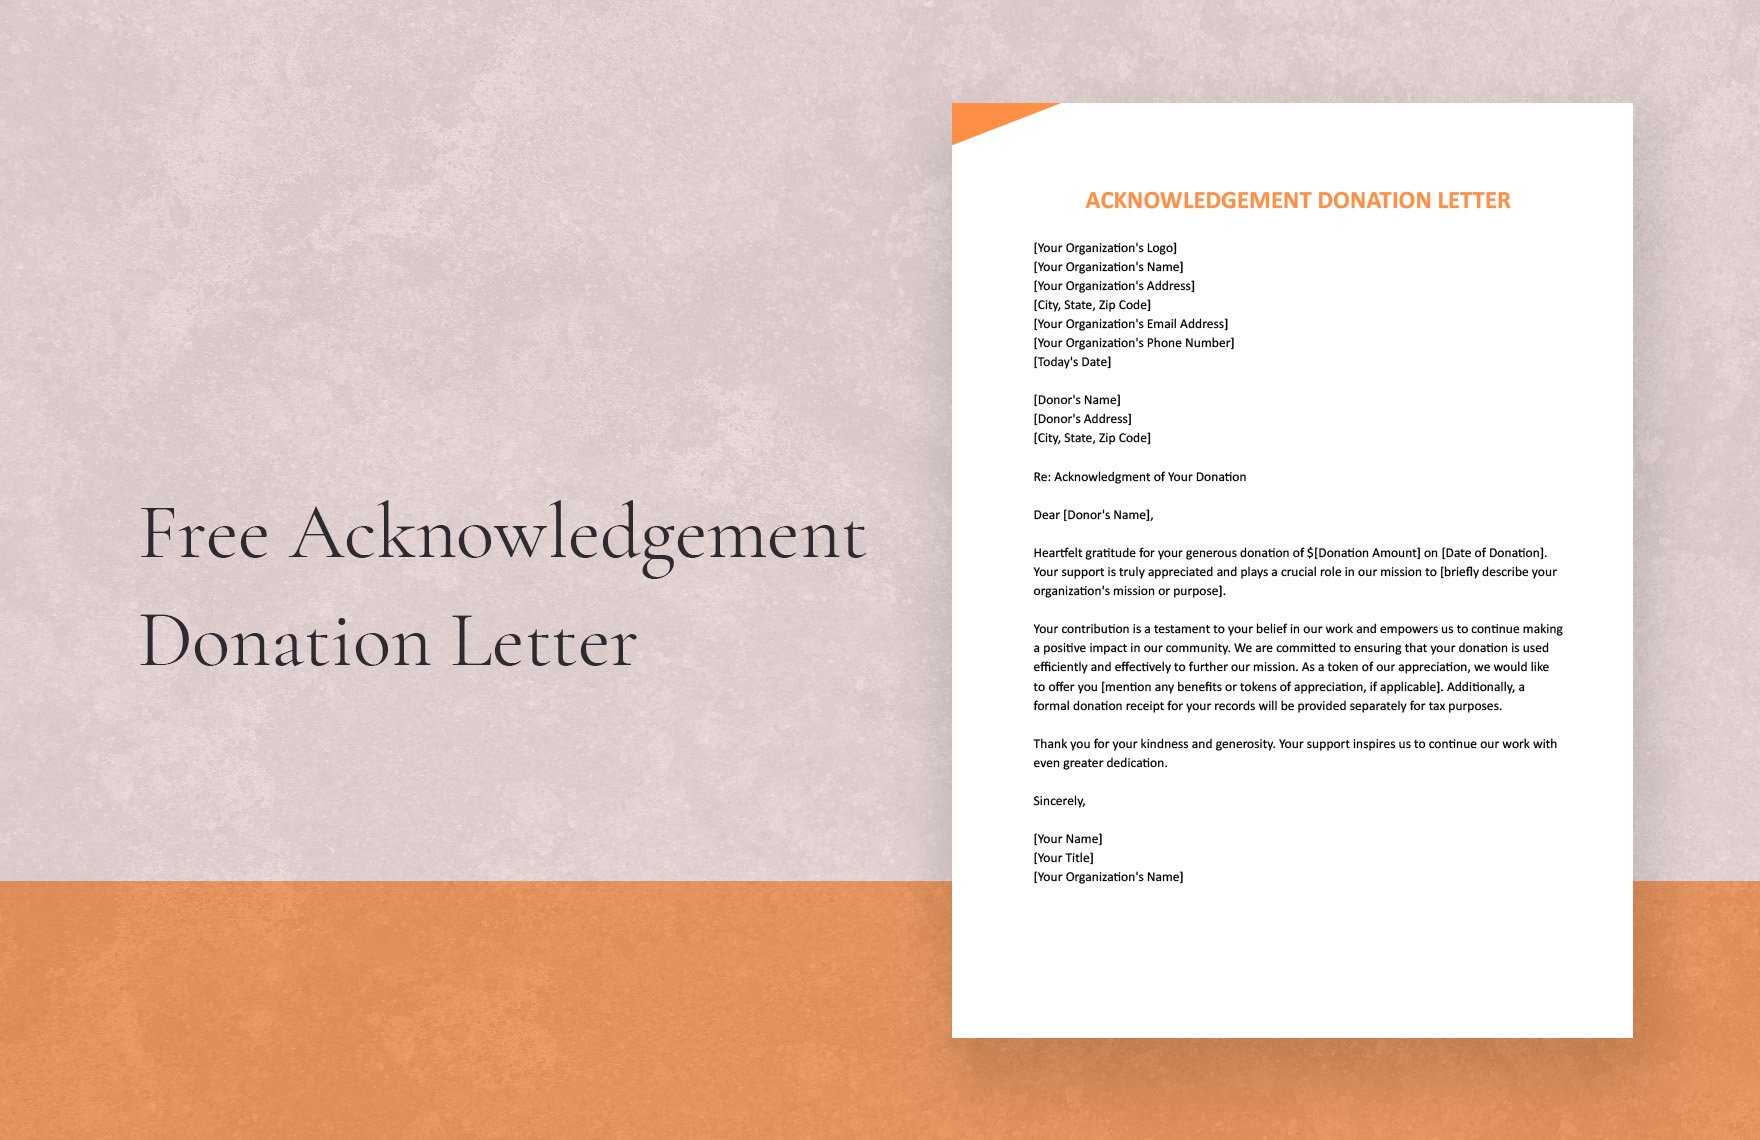 Acknowledgement Donation Letter in Word, Google Docs